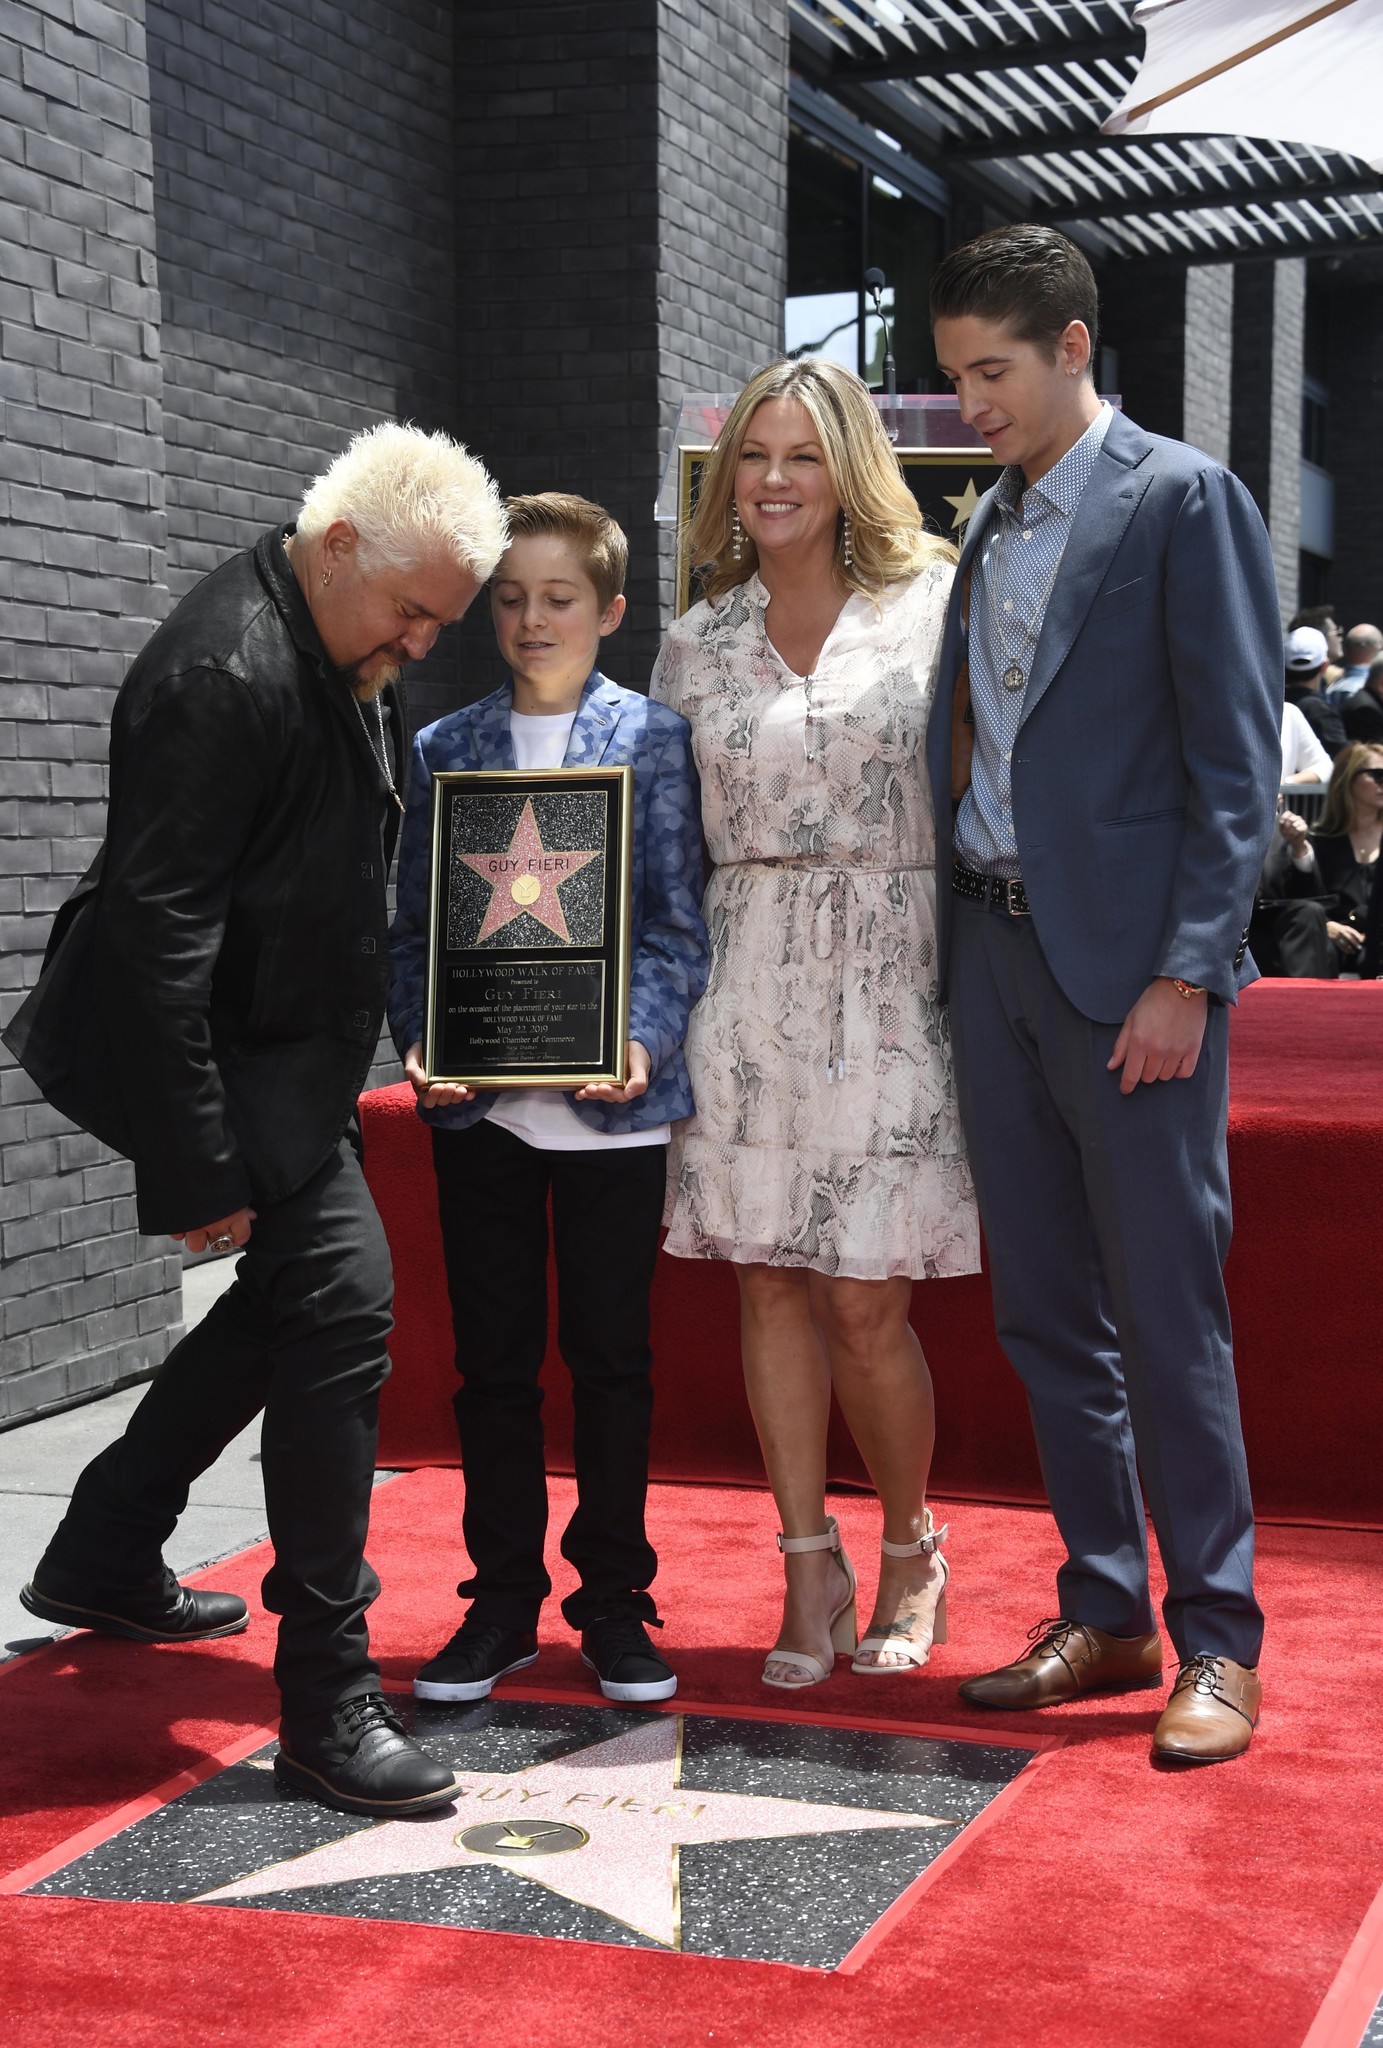 (L-R) Chef Guy Fieri with his family Ryder Fieri, Lori Fieri and Hunter Fieri attend the Hollywood Walk of Fame ceremony honoring Guy Fieri in Hollywood, California on May 22, 2019.